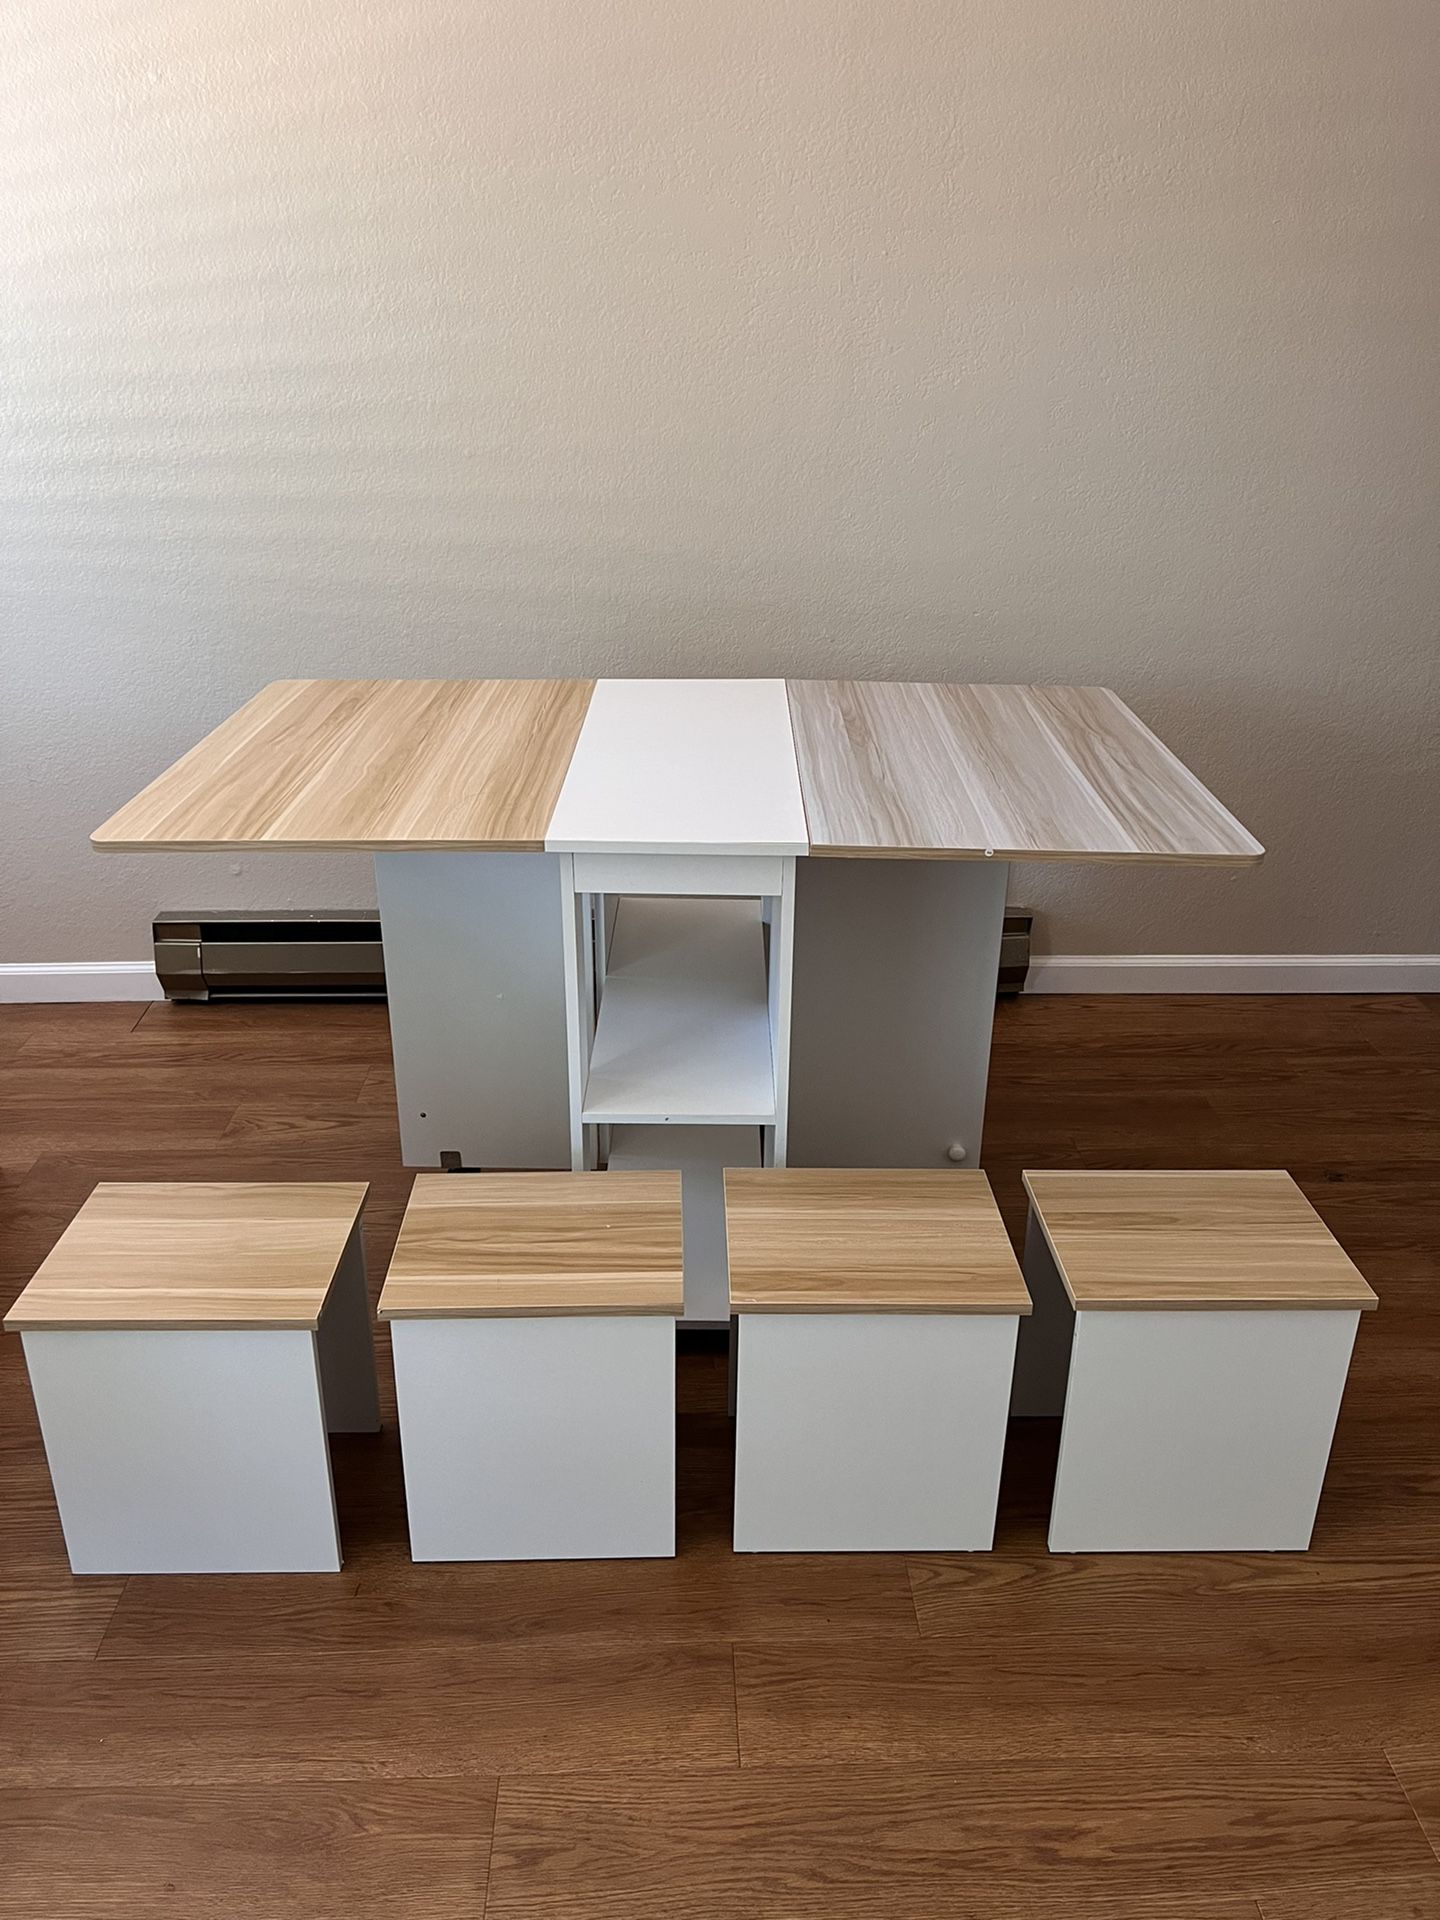 Dining Table with Stools - Foldable